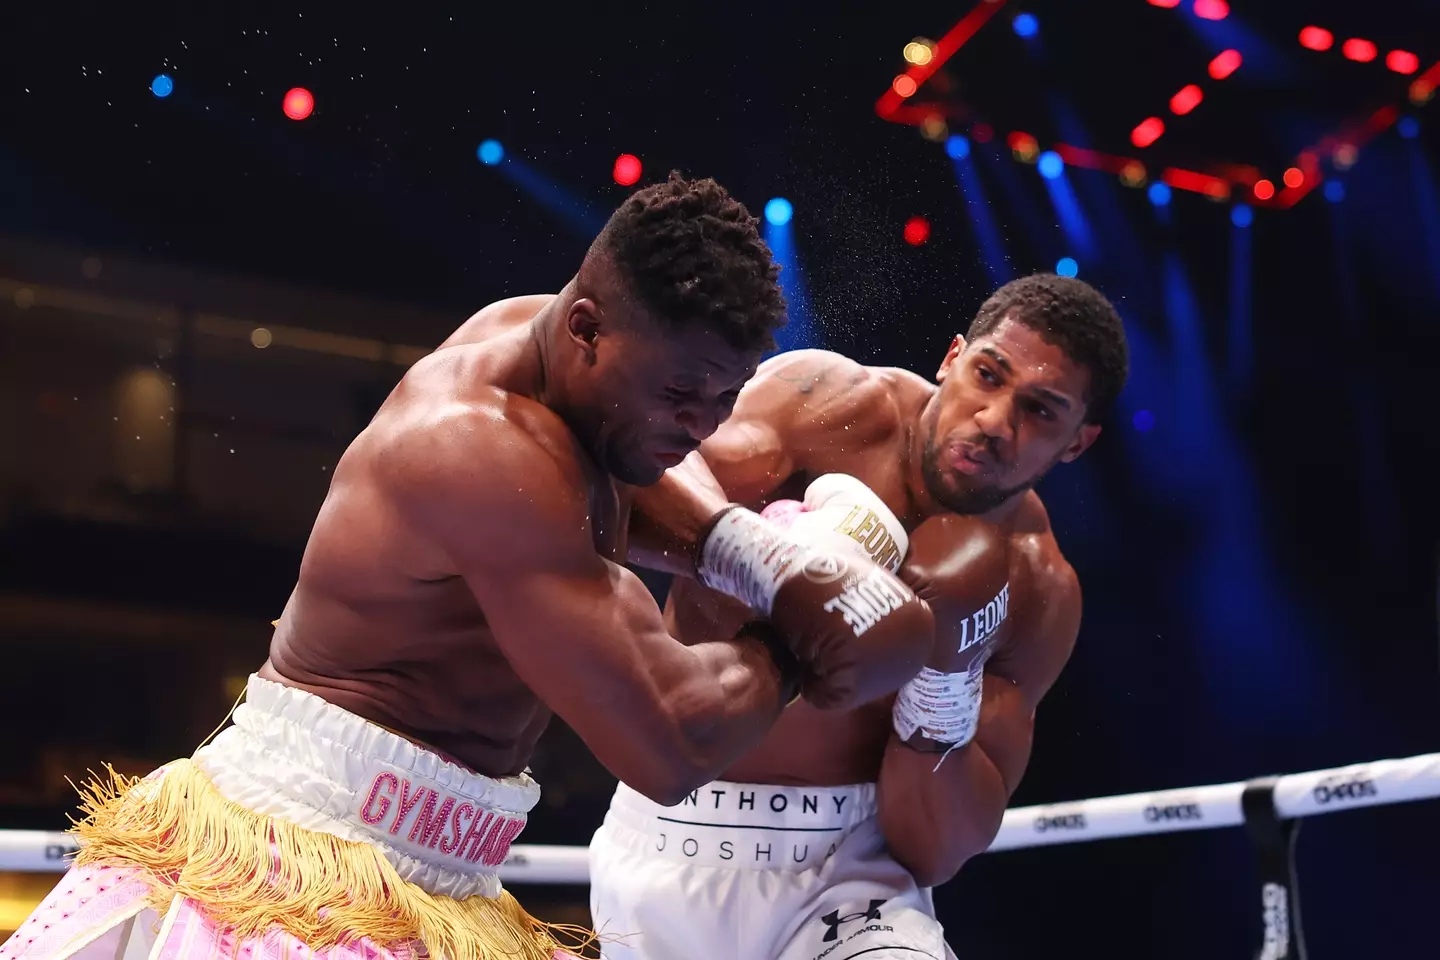 Anthony Joshua took home the win against Francis Ngannou.